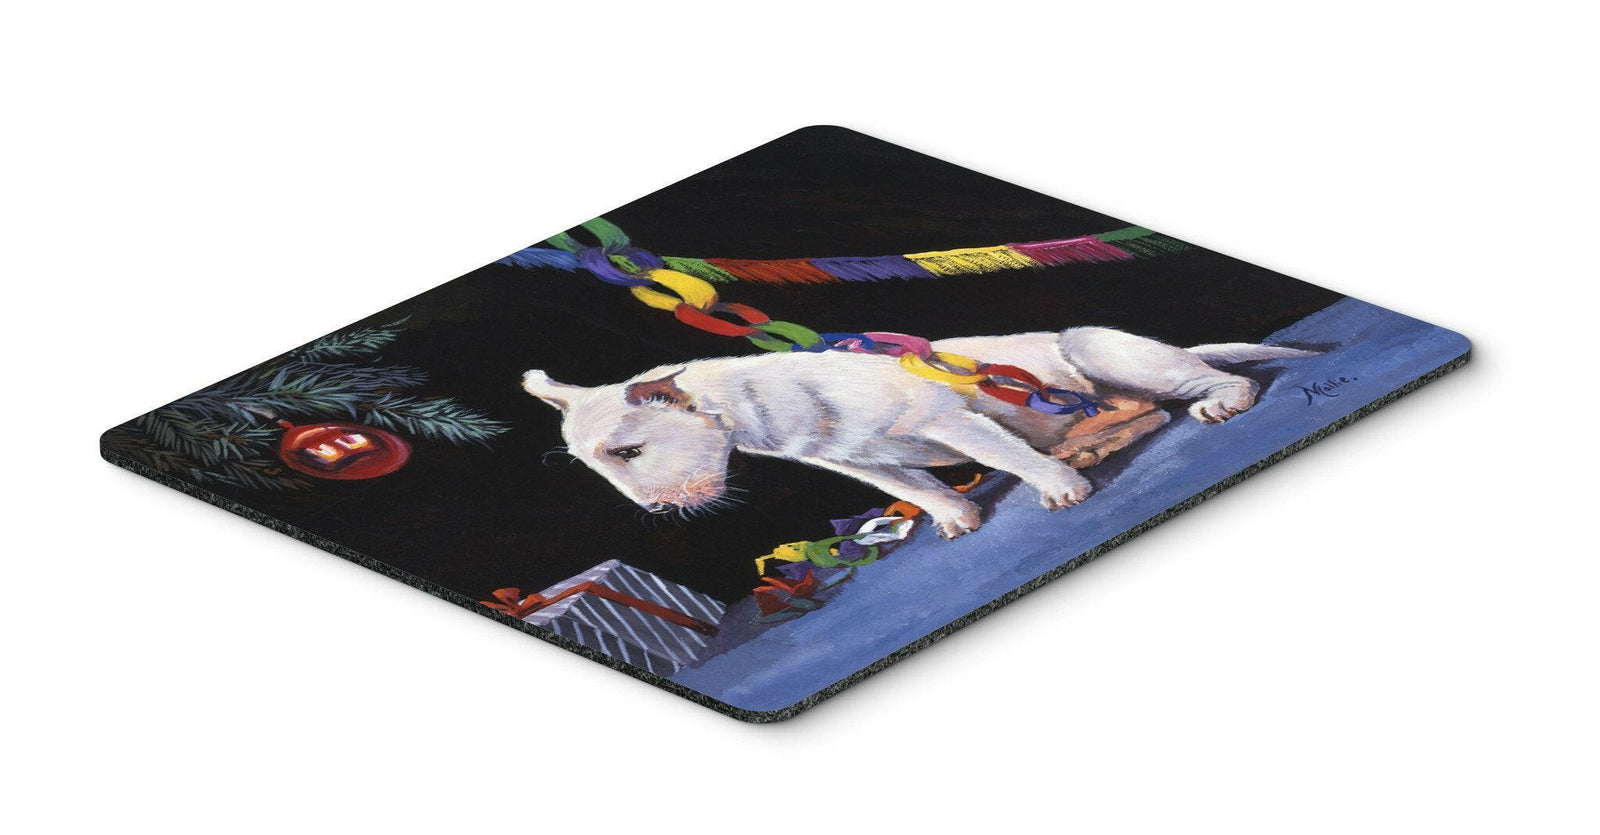 Bull Terrier under the Christmas Tree Mouse Pad, Hot Pad or Trivet FMF0012MP by Caroline's Treasures